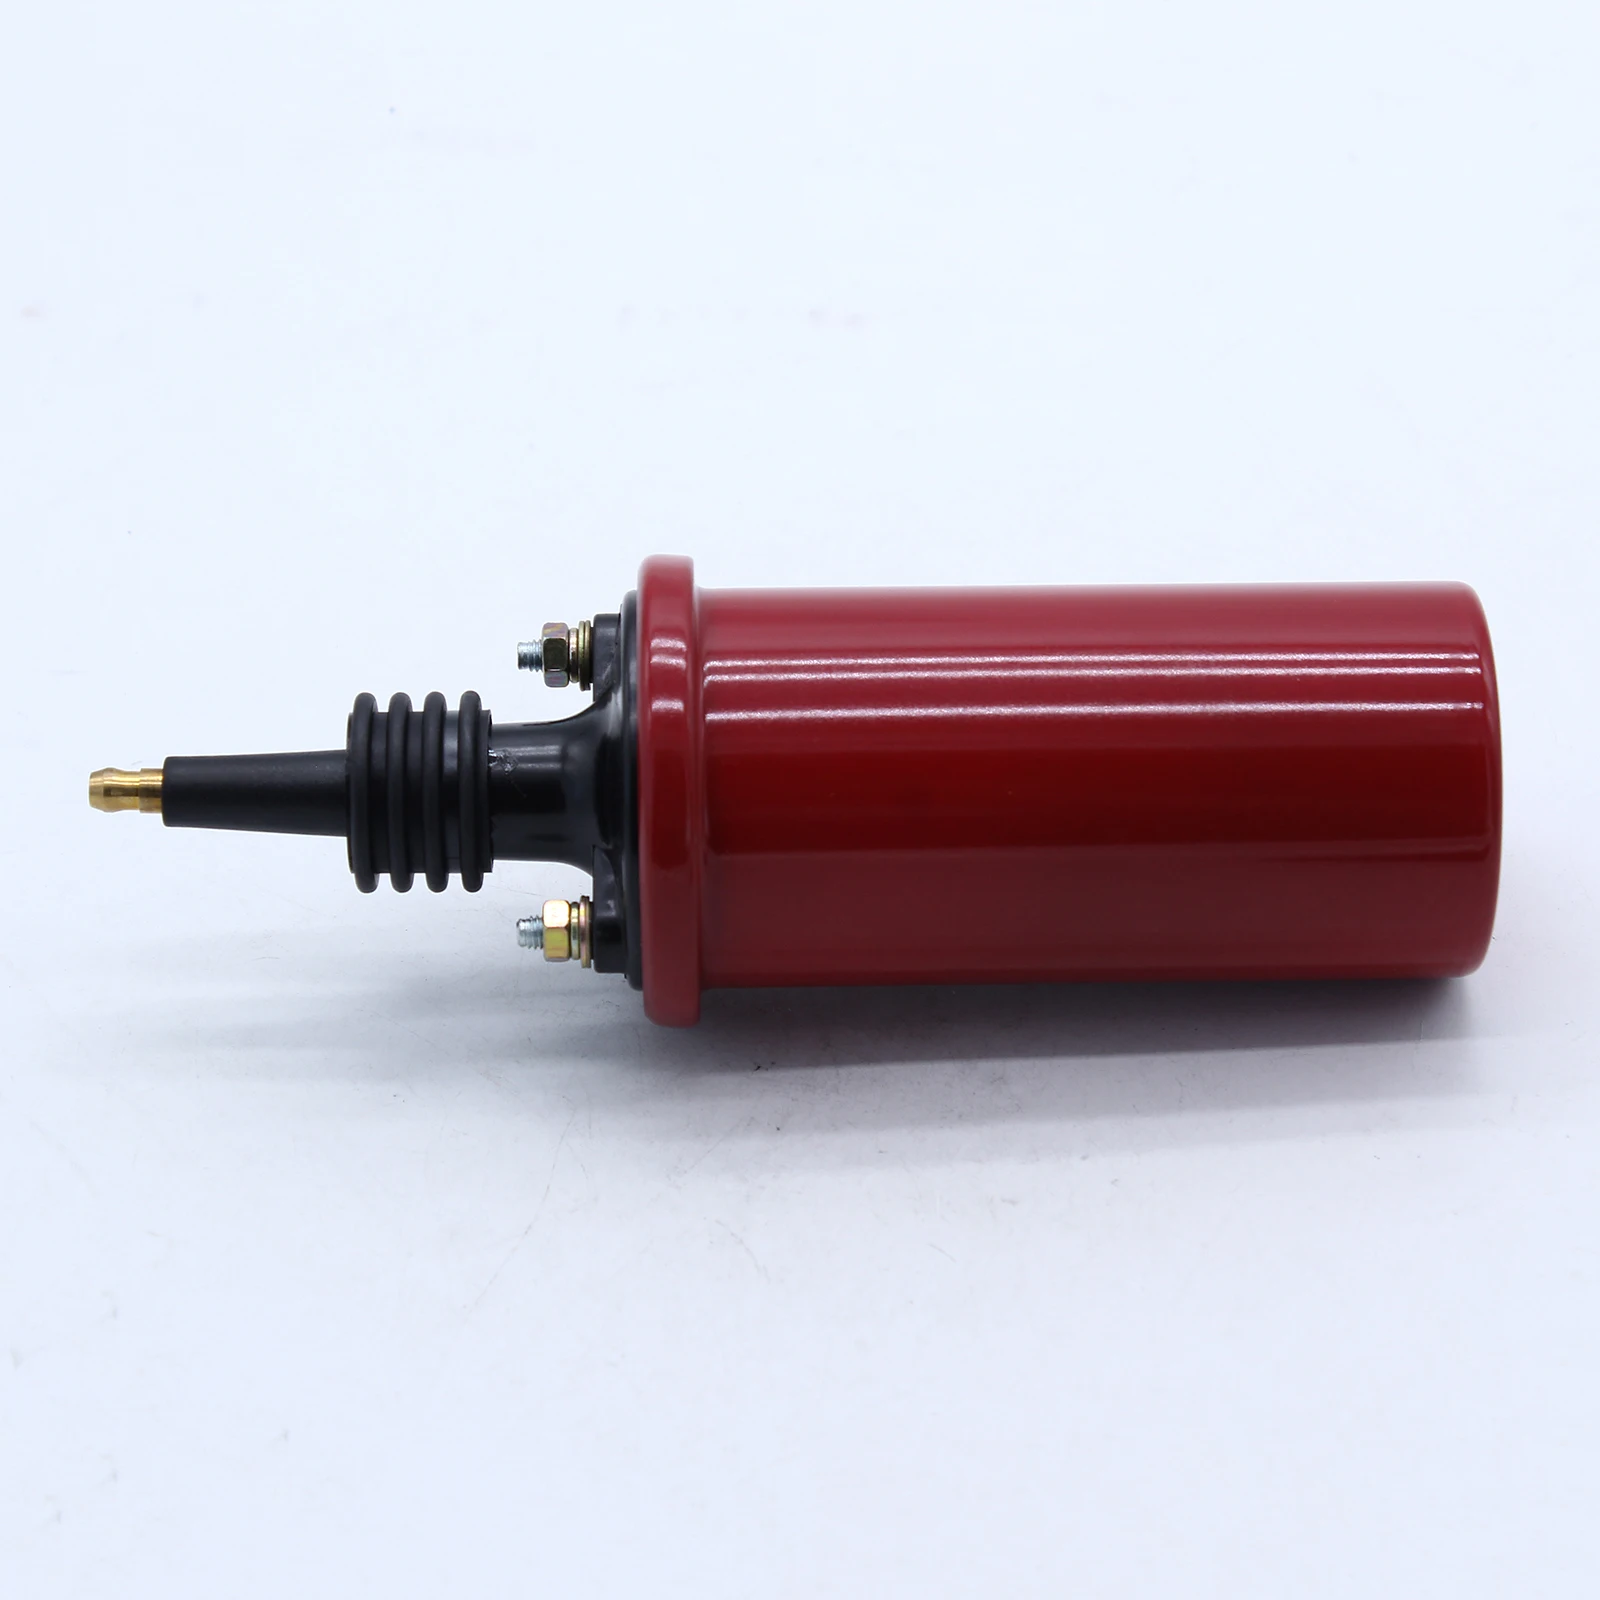 Red Oil Filled Coil Ignition Coil Canister HEI-style Boot High Vibration